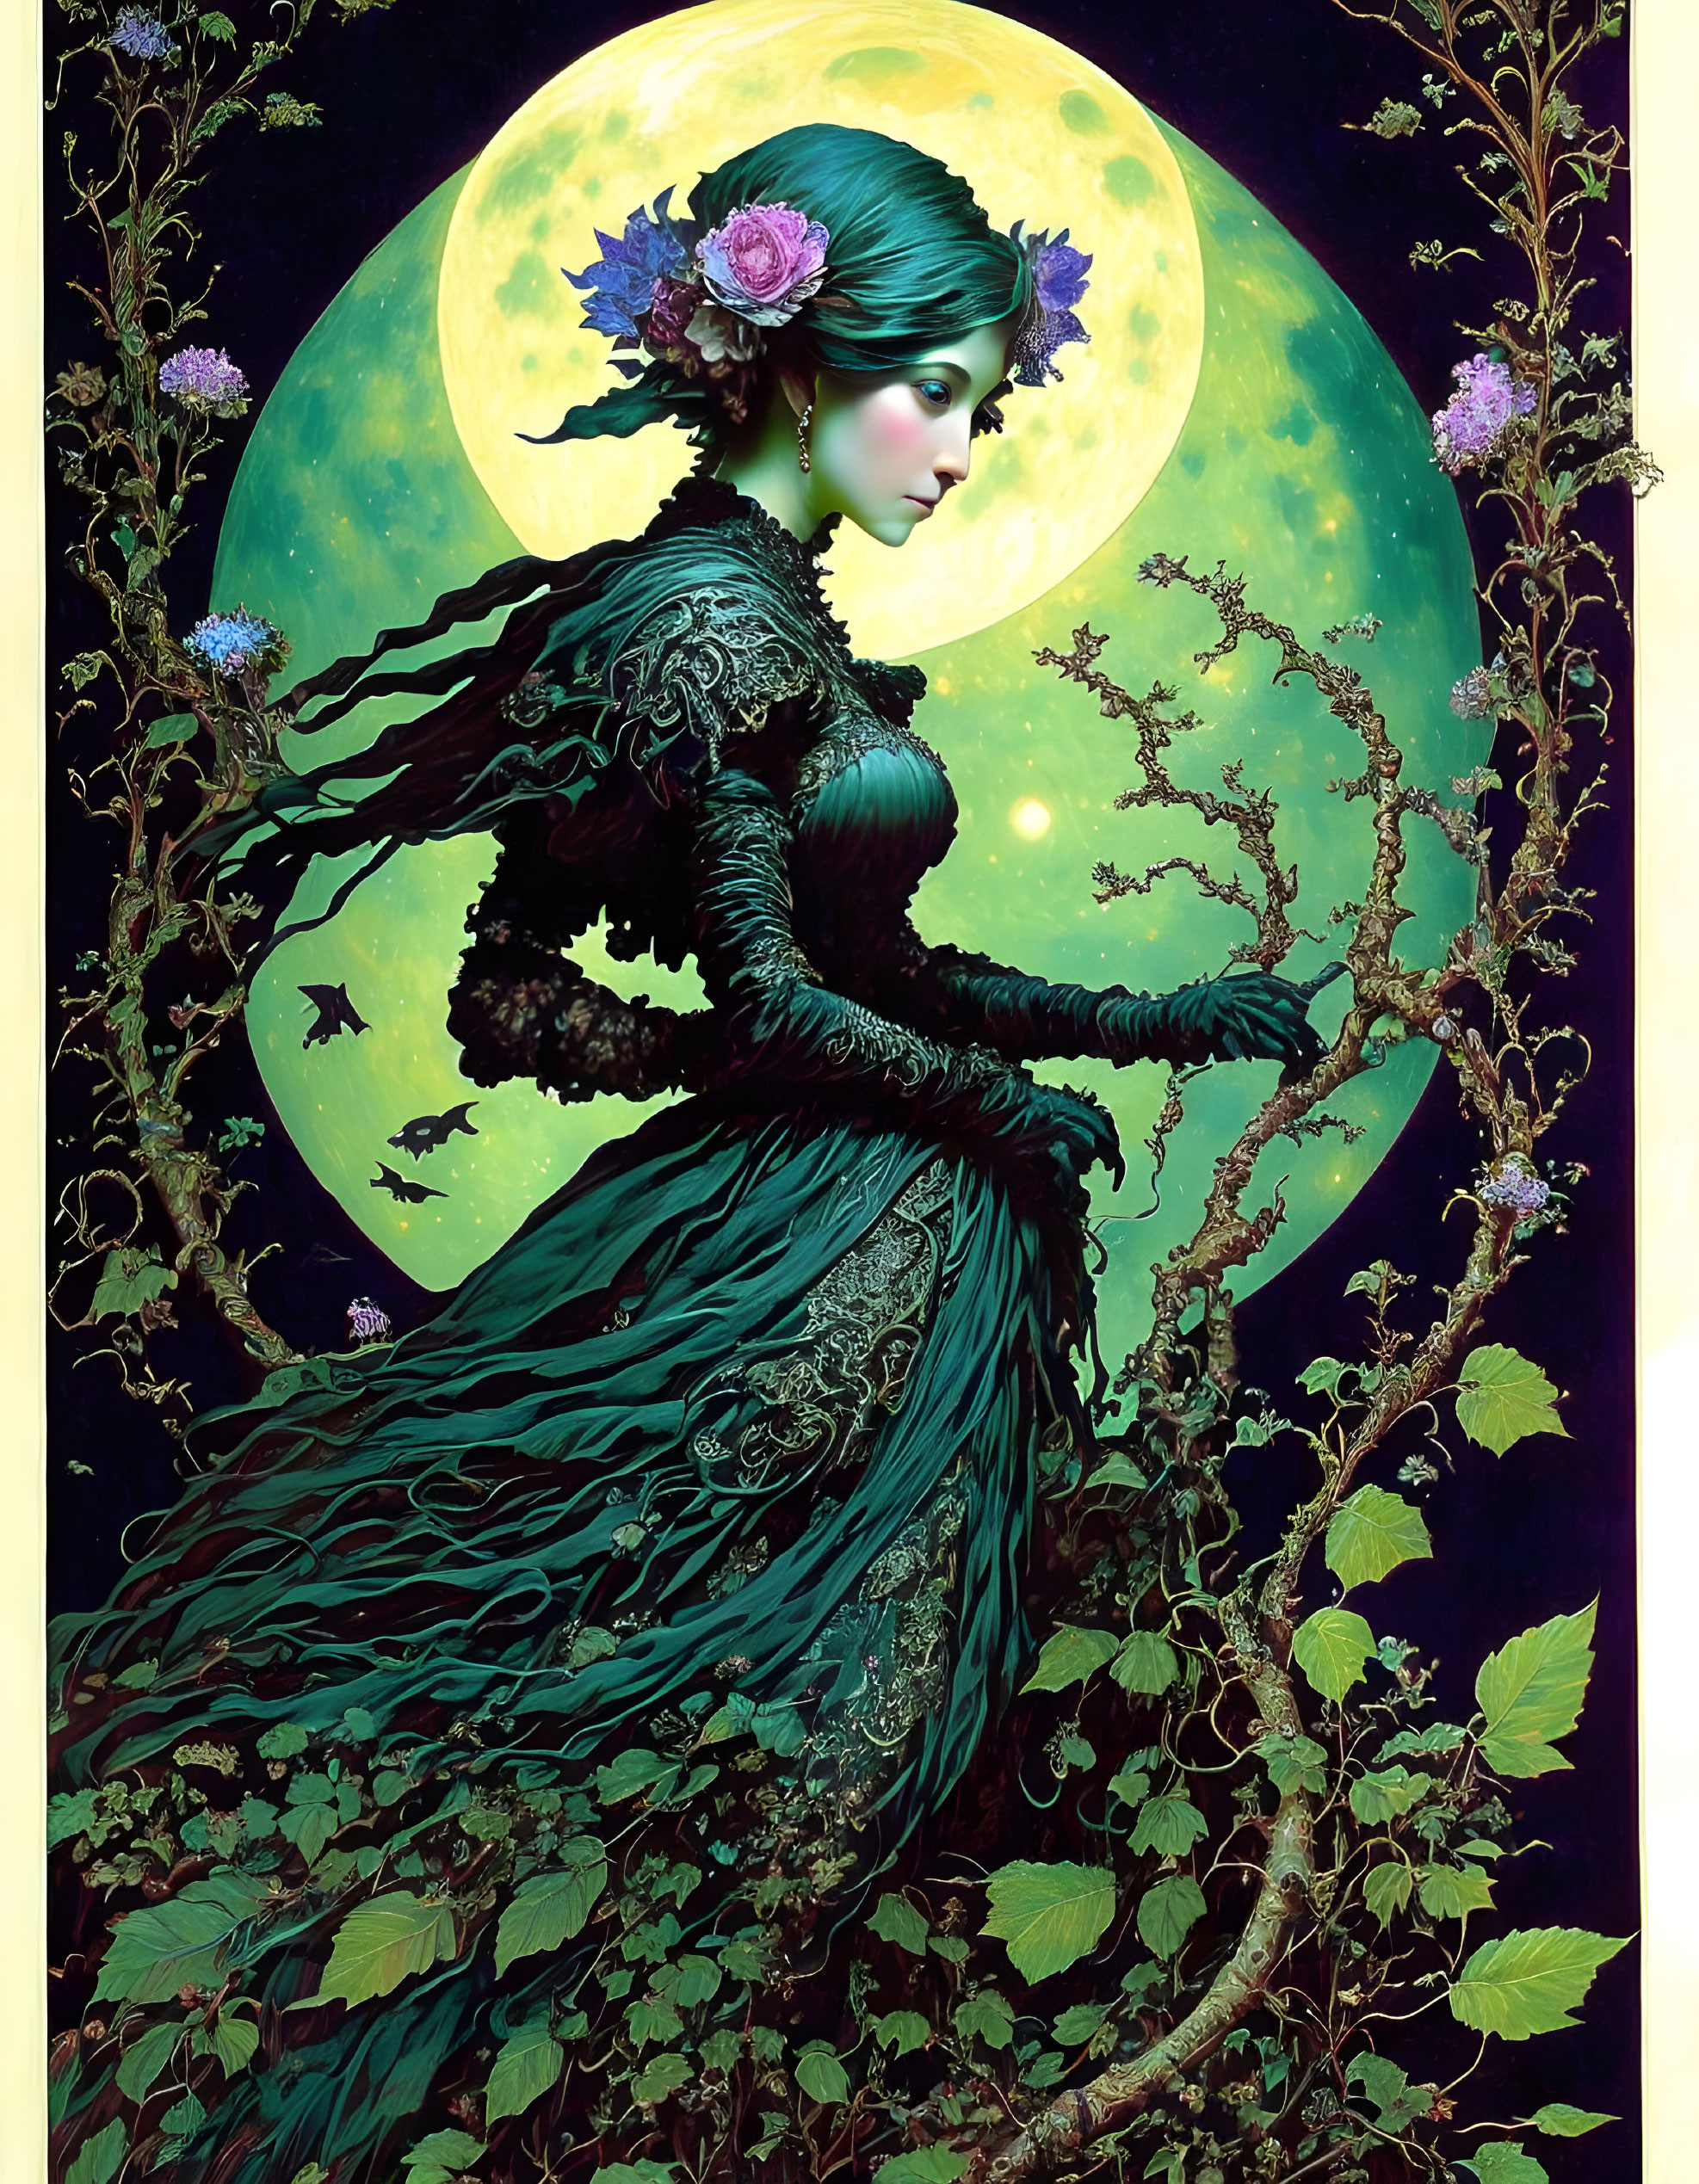 Illustrated woman in green and black attire merging with a tree under a luminous full moon.